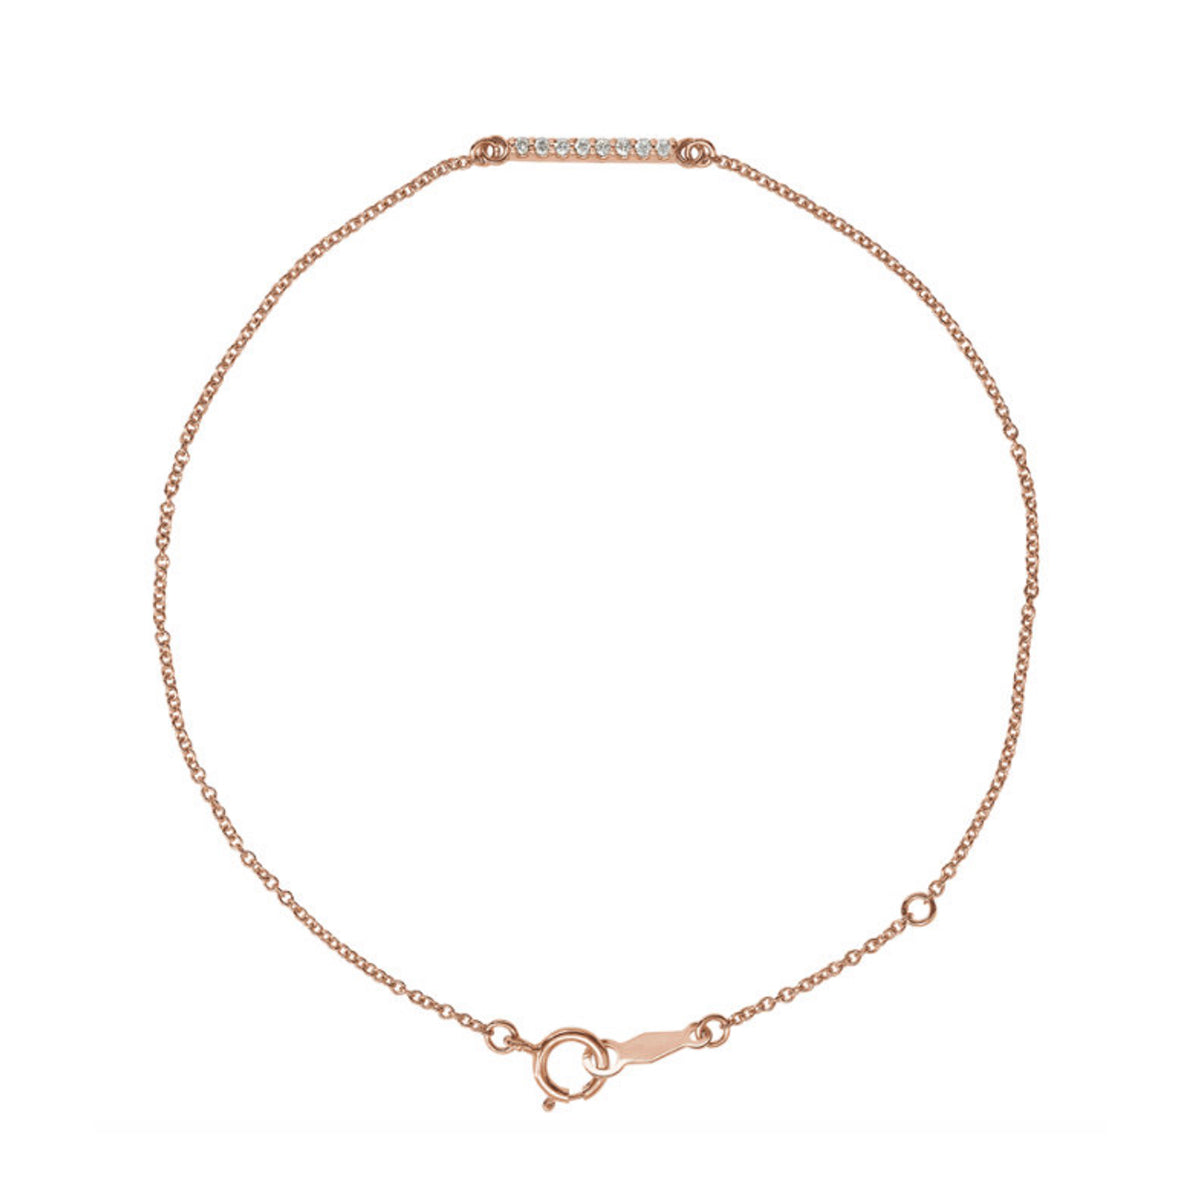 Diamond Bar Bracelet in White, Yellow or Rose Gold - Talisman Collection Fine Jewelers